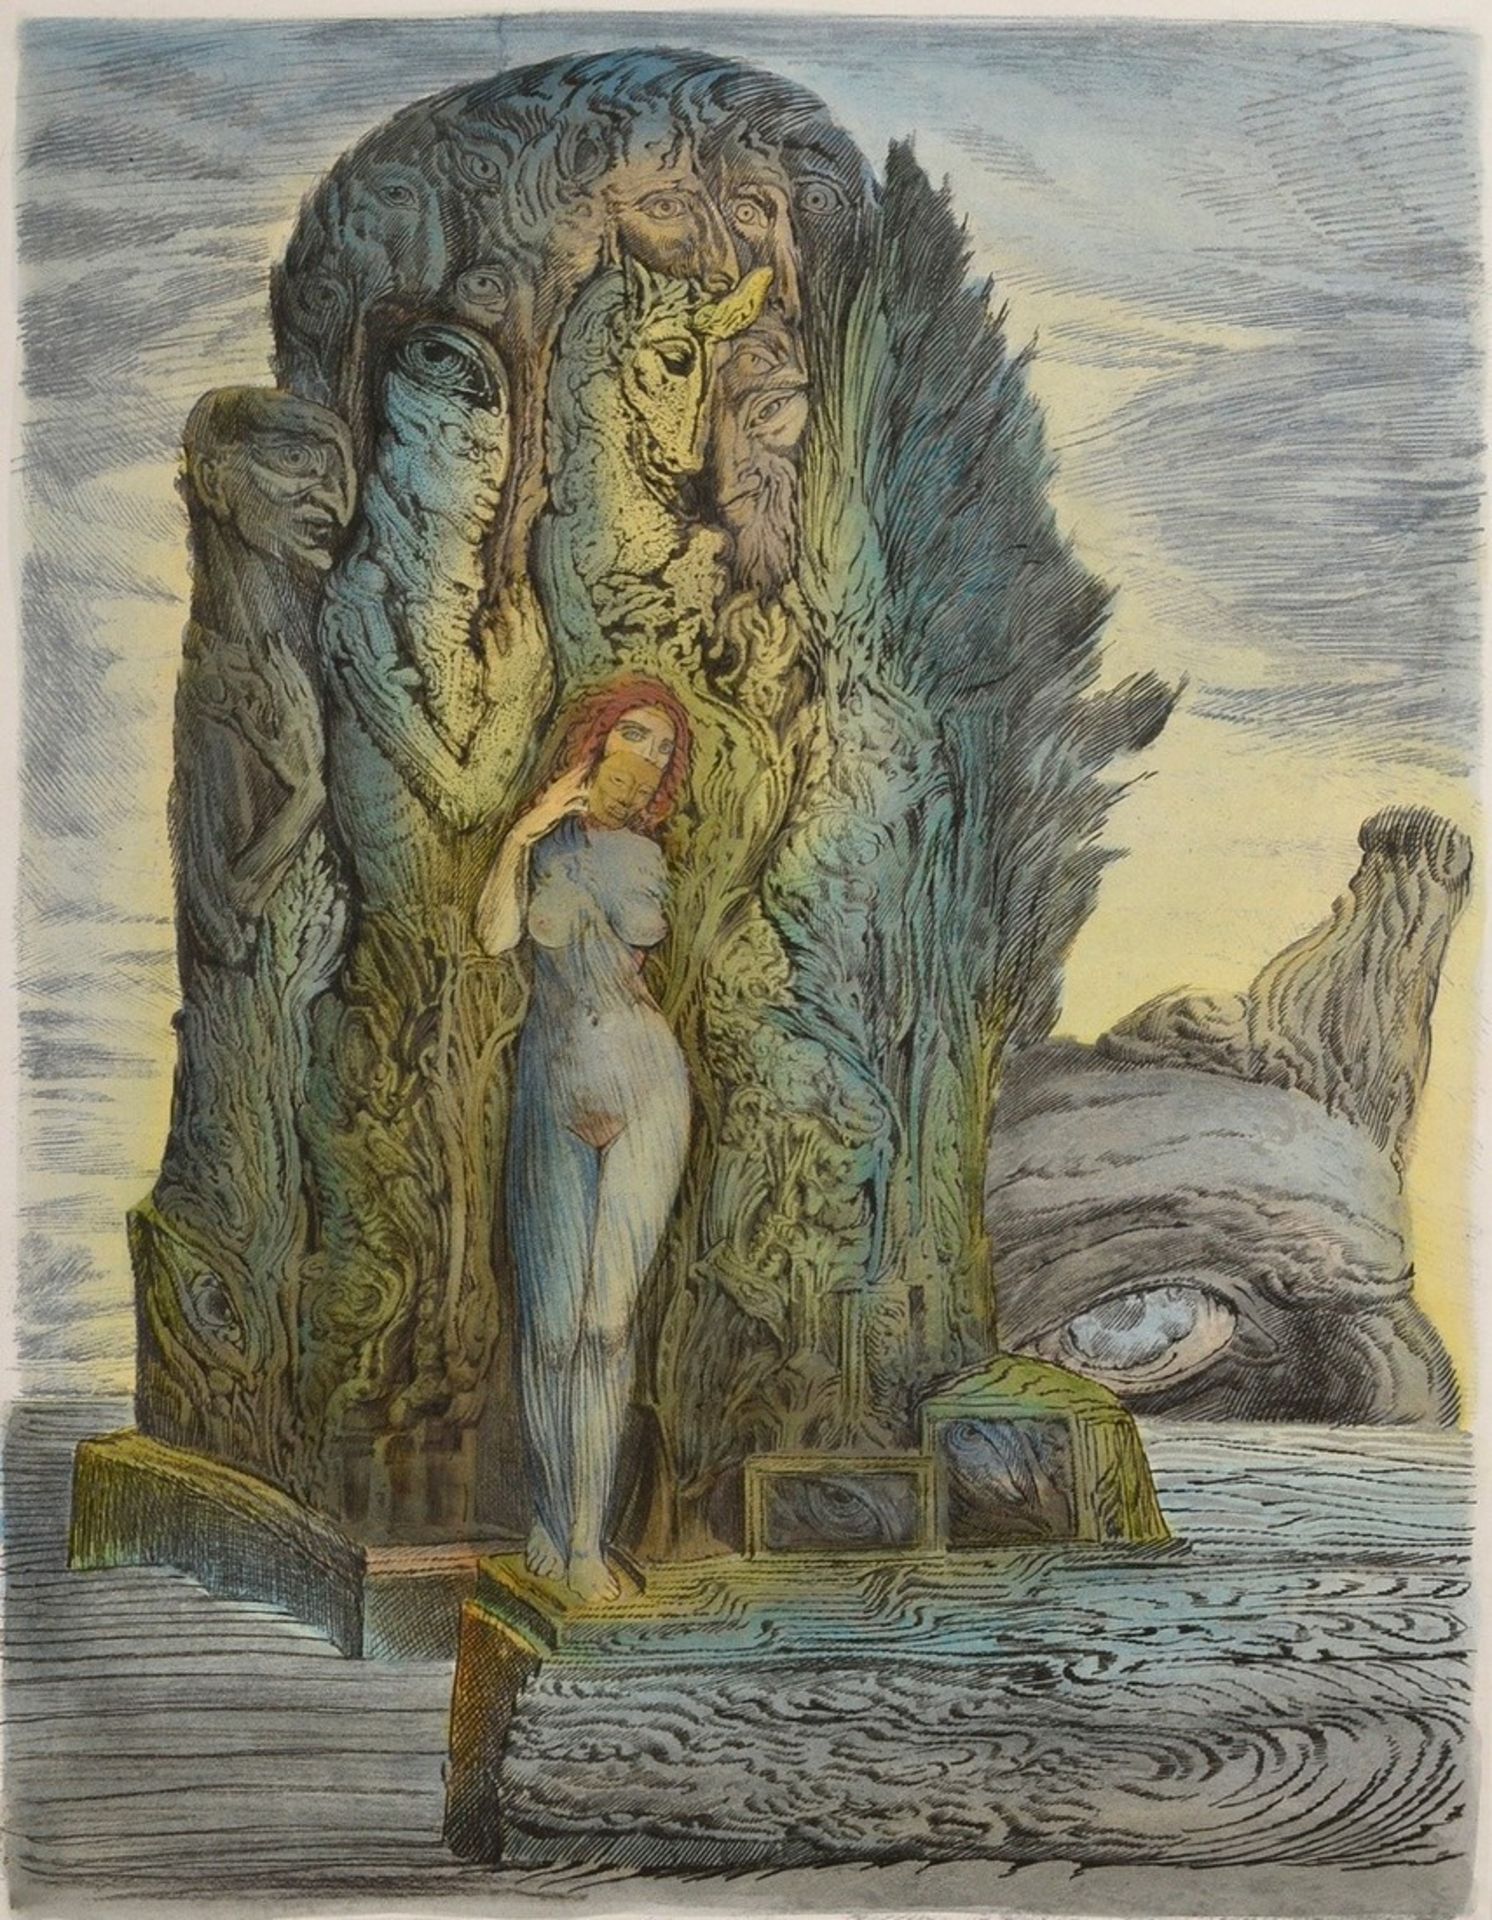 Fuchs, Ernst (1930-2015) "Standing female nude with mask", colour etching, e.a., b. sign./num., PM 